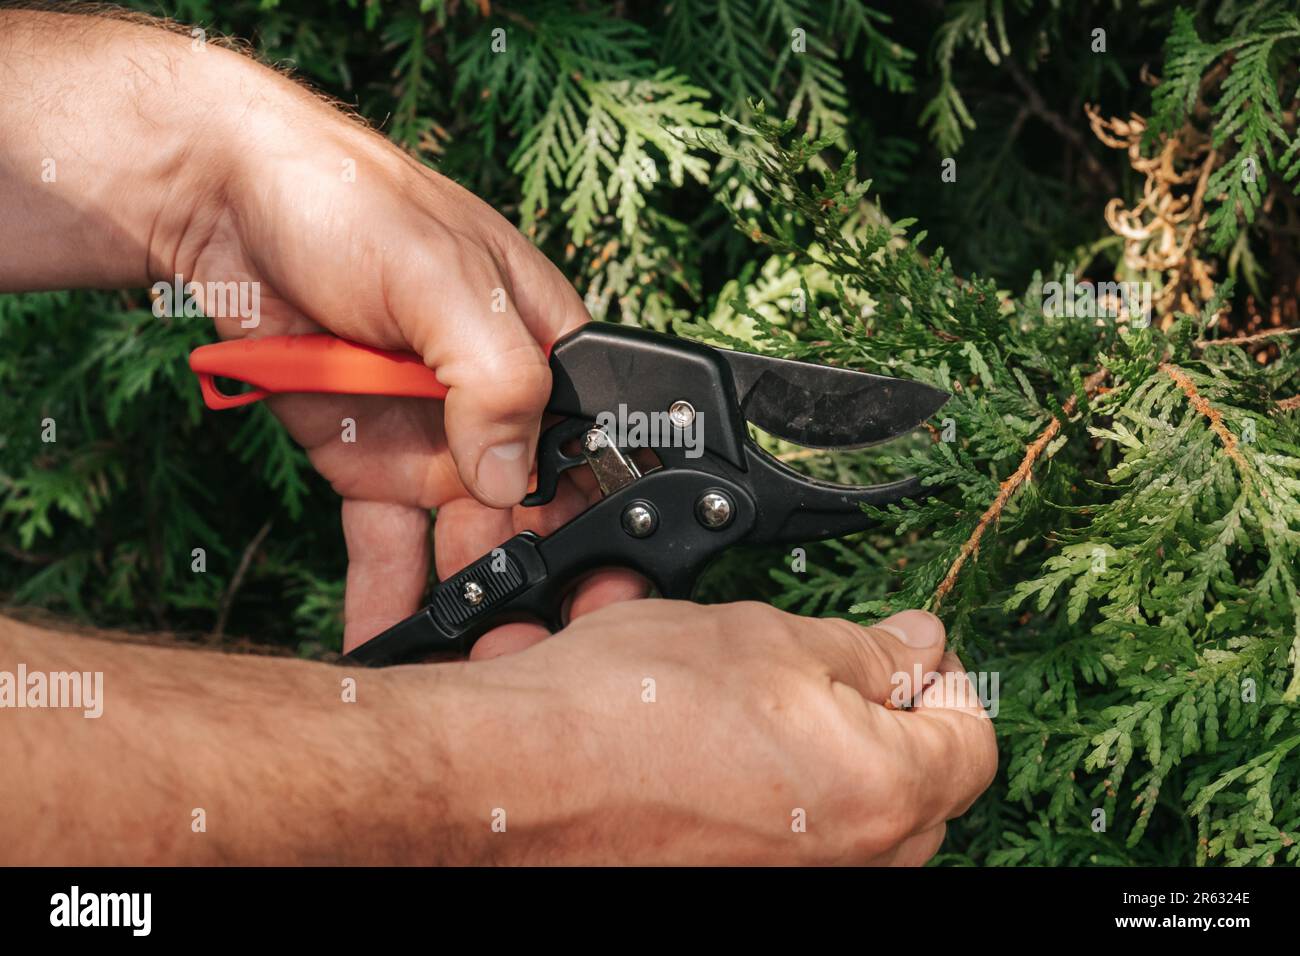 Thuja Brabant pruning.Garden scissors for cutting coniferous plants .garden trimmer in male hands cuts a hedge of thuja.sanitary pruning of plants in Stock Photo